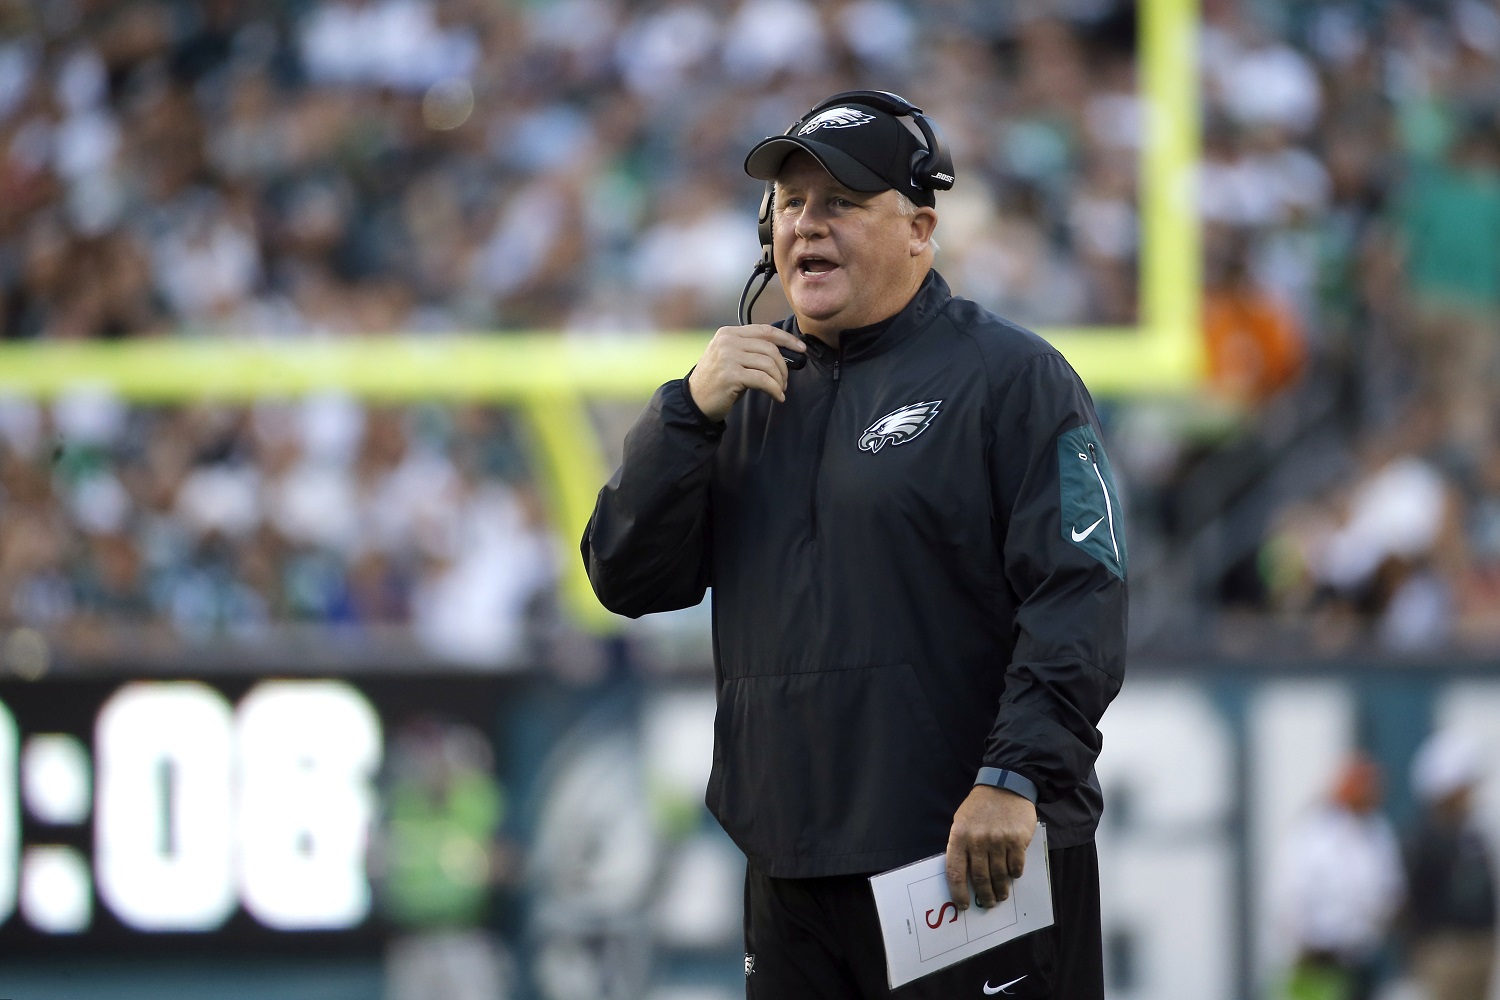 Philadelphia Eagles head coach Chip Kelly gestures on the sidelines during the first half of an NFL football game against the Dallas Cowboys, Sunday, Sept. 20, 2015, in Philadelphia. (AP Photo/Michael Perez)